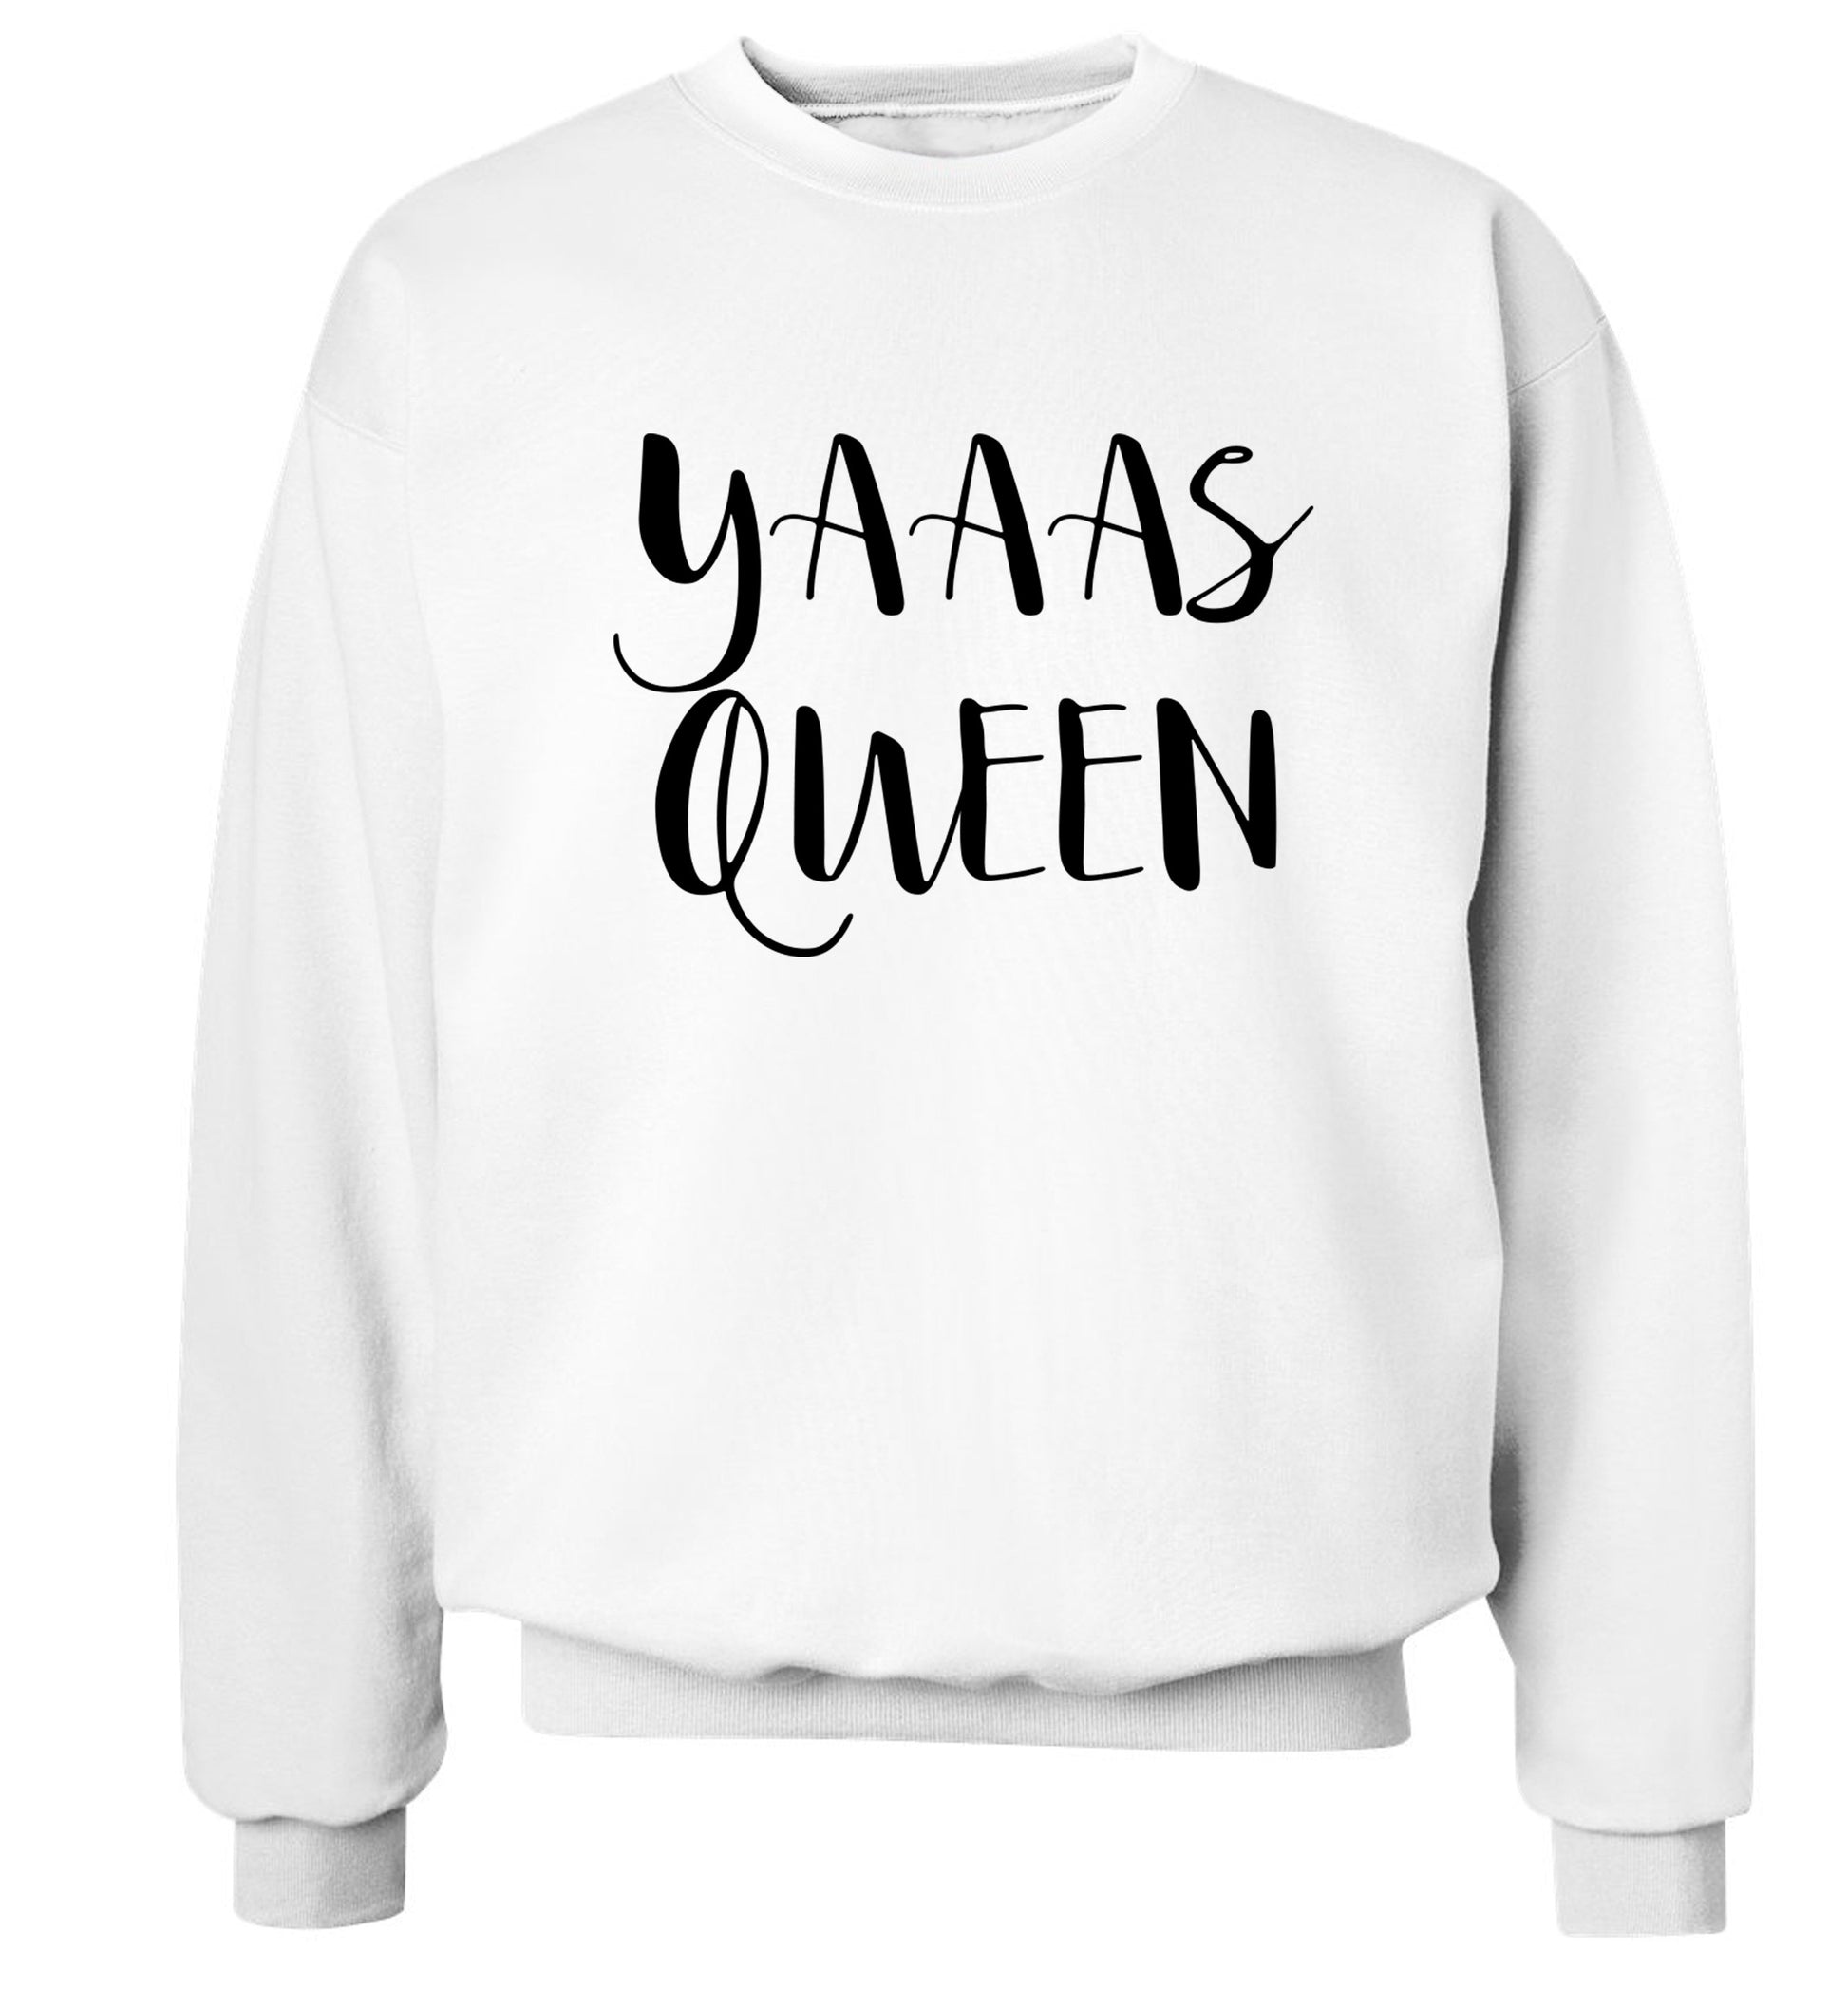 Yas Queen Adult's unisex white Sweater 2XL